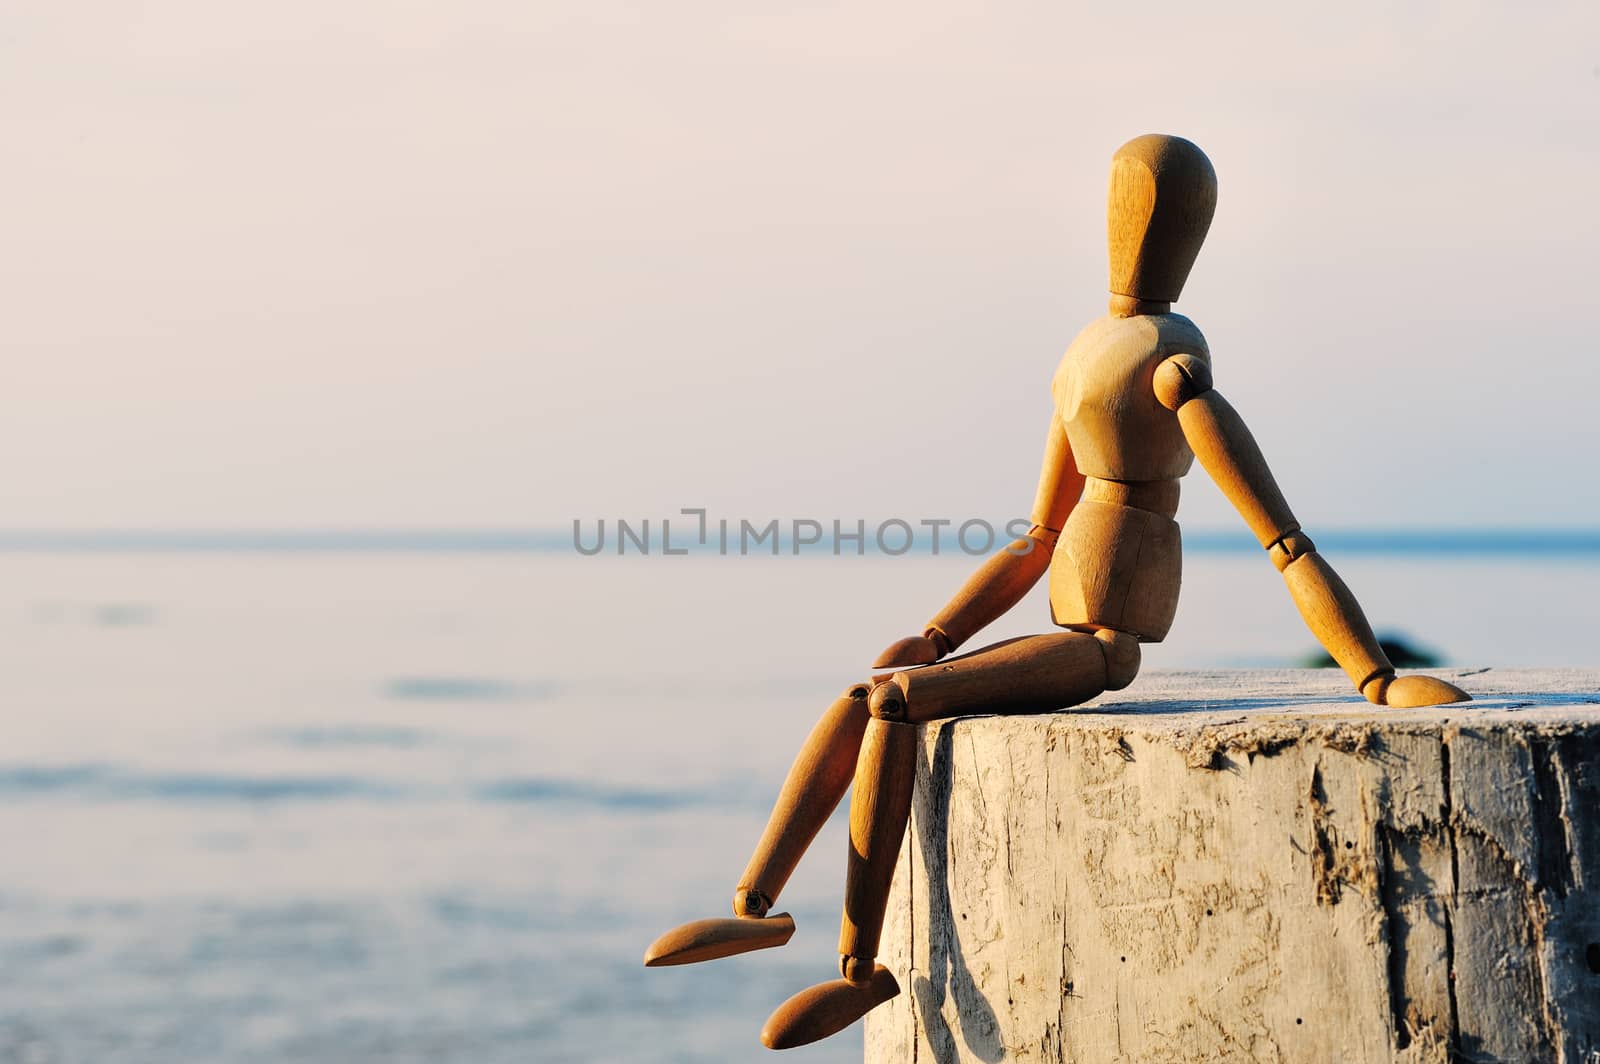 Wooden female figure sitting on the stump at the sea